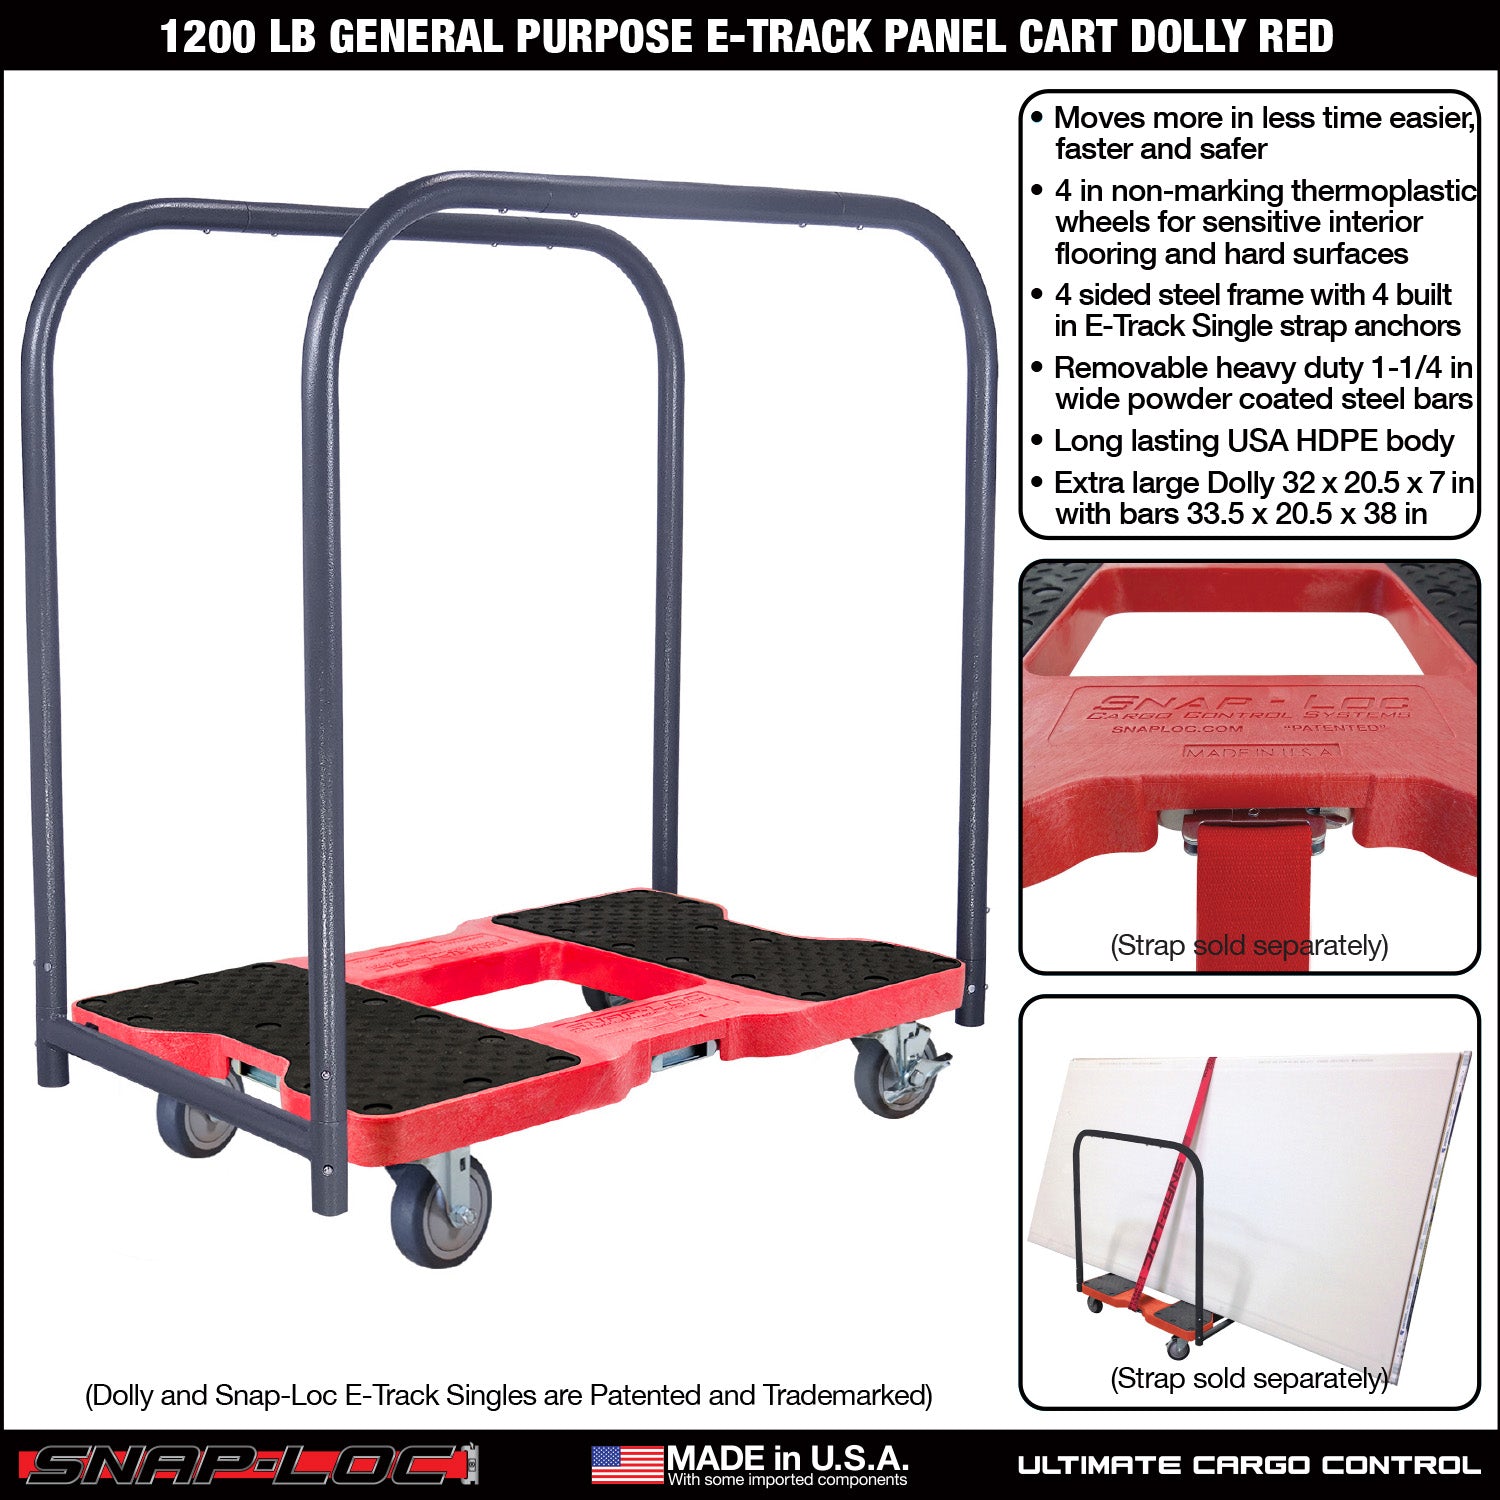 Snap-Loc 1200 lbs Professional E-Track Panel Cart Dolly - Red